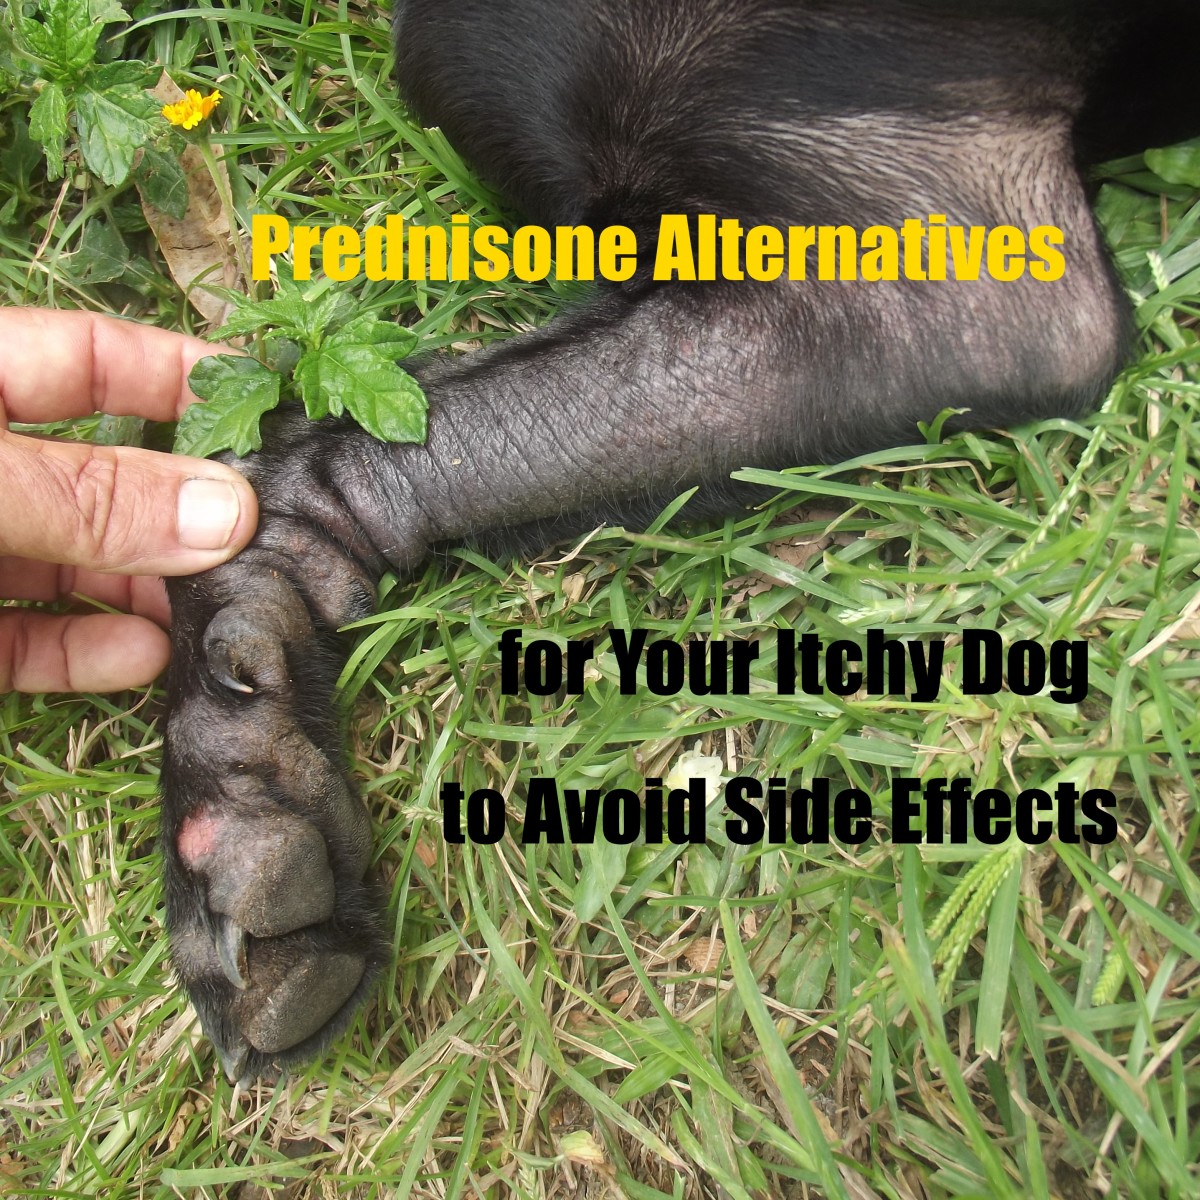 Natural prednisone alternatives are available to help your dog avoid the serious side effects.